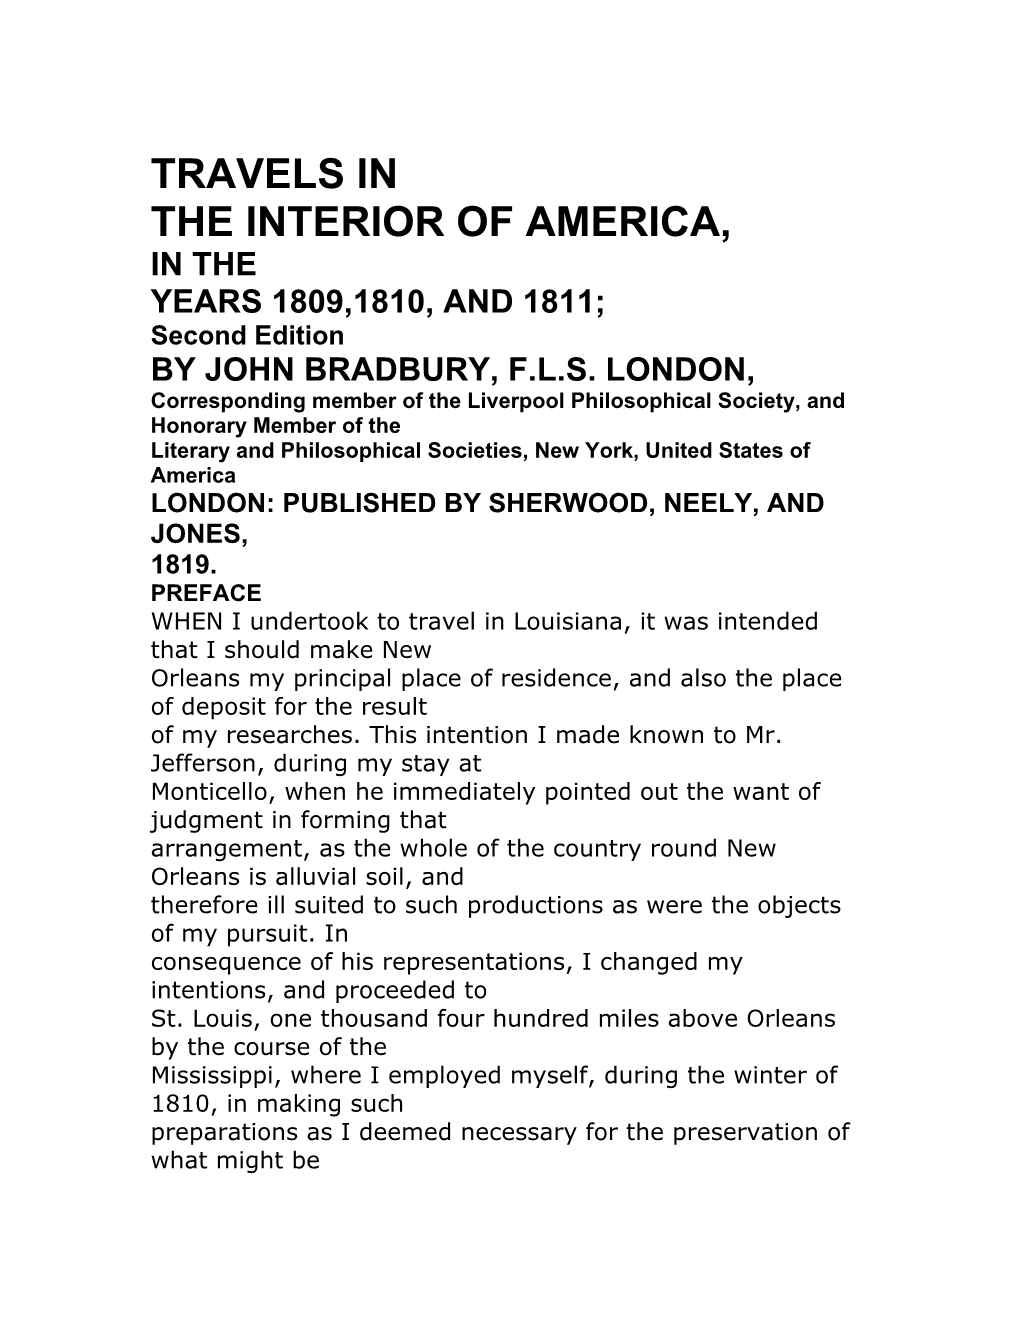 TRAVELS in the INTERIOR of AMERICA, in the YEARS 1809,1810, and 1811; Second Edition by JOHN BRADBURY, F.L.S